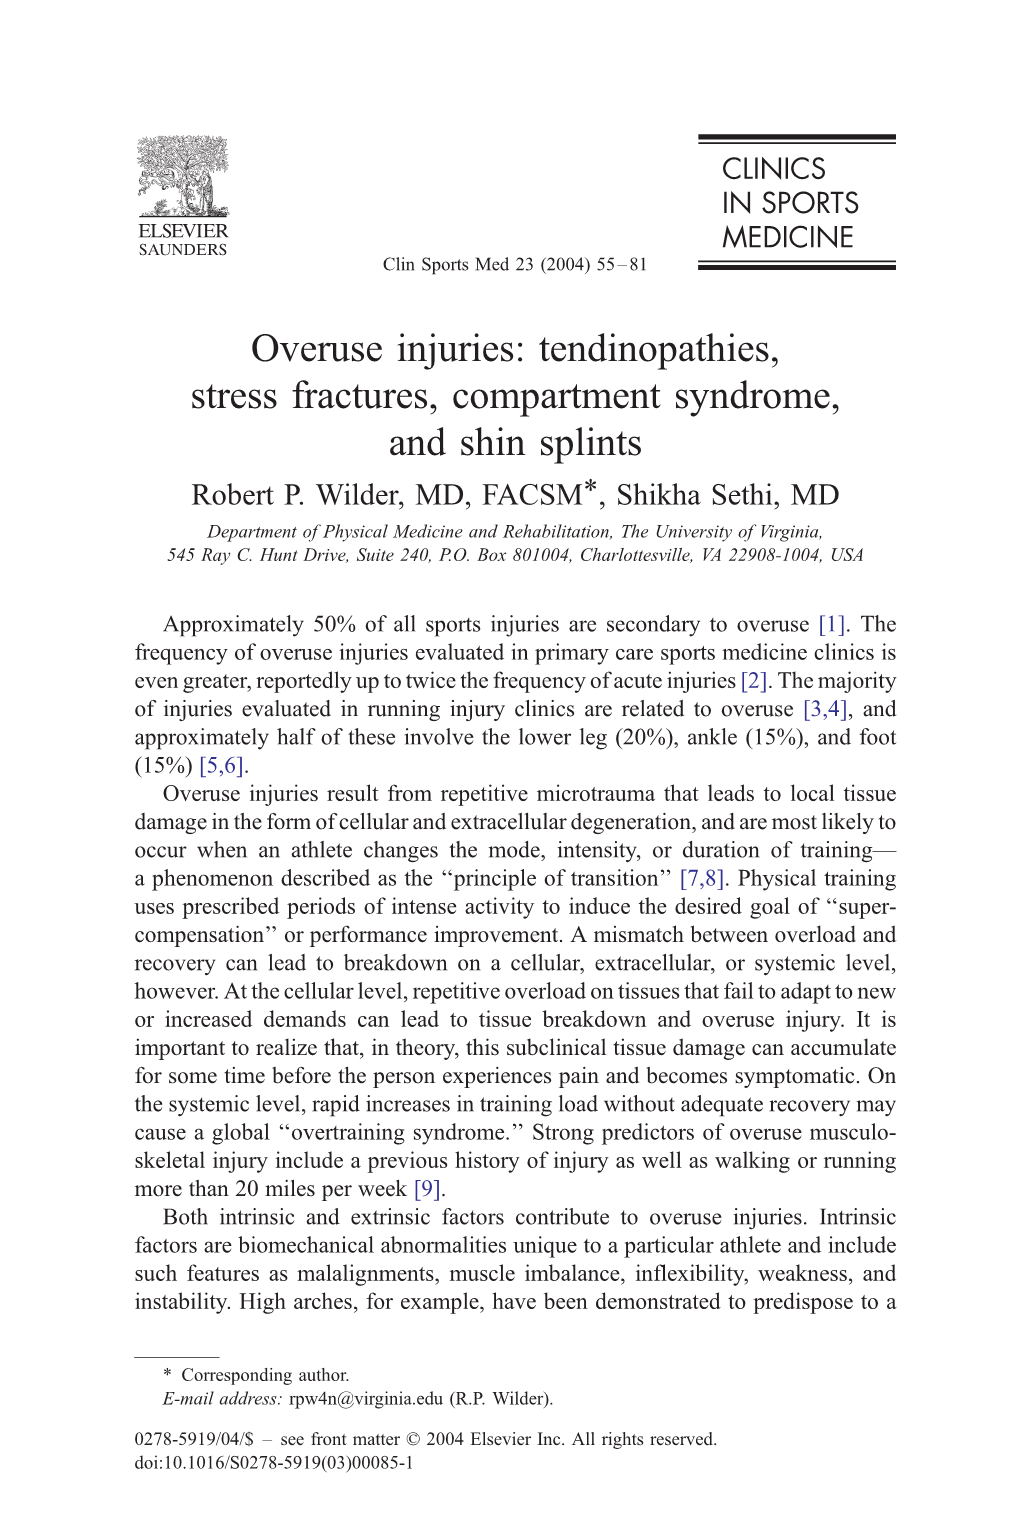 Overuse Injuries: Tendinopathies, Stress Fractures, Compartment Syndrome, and Shin Splints Robert P